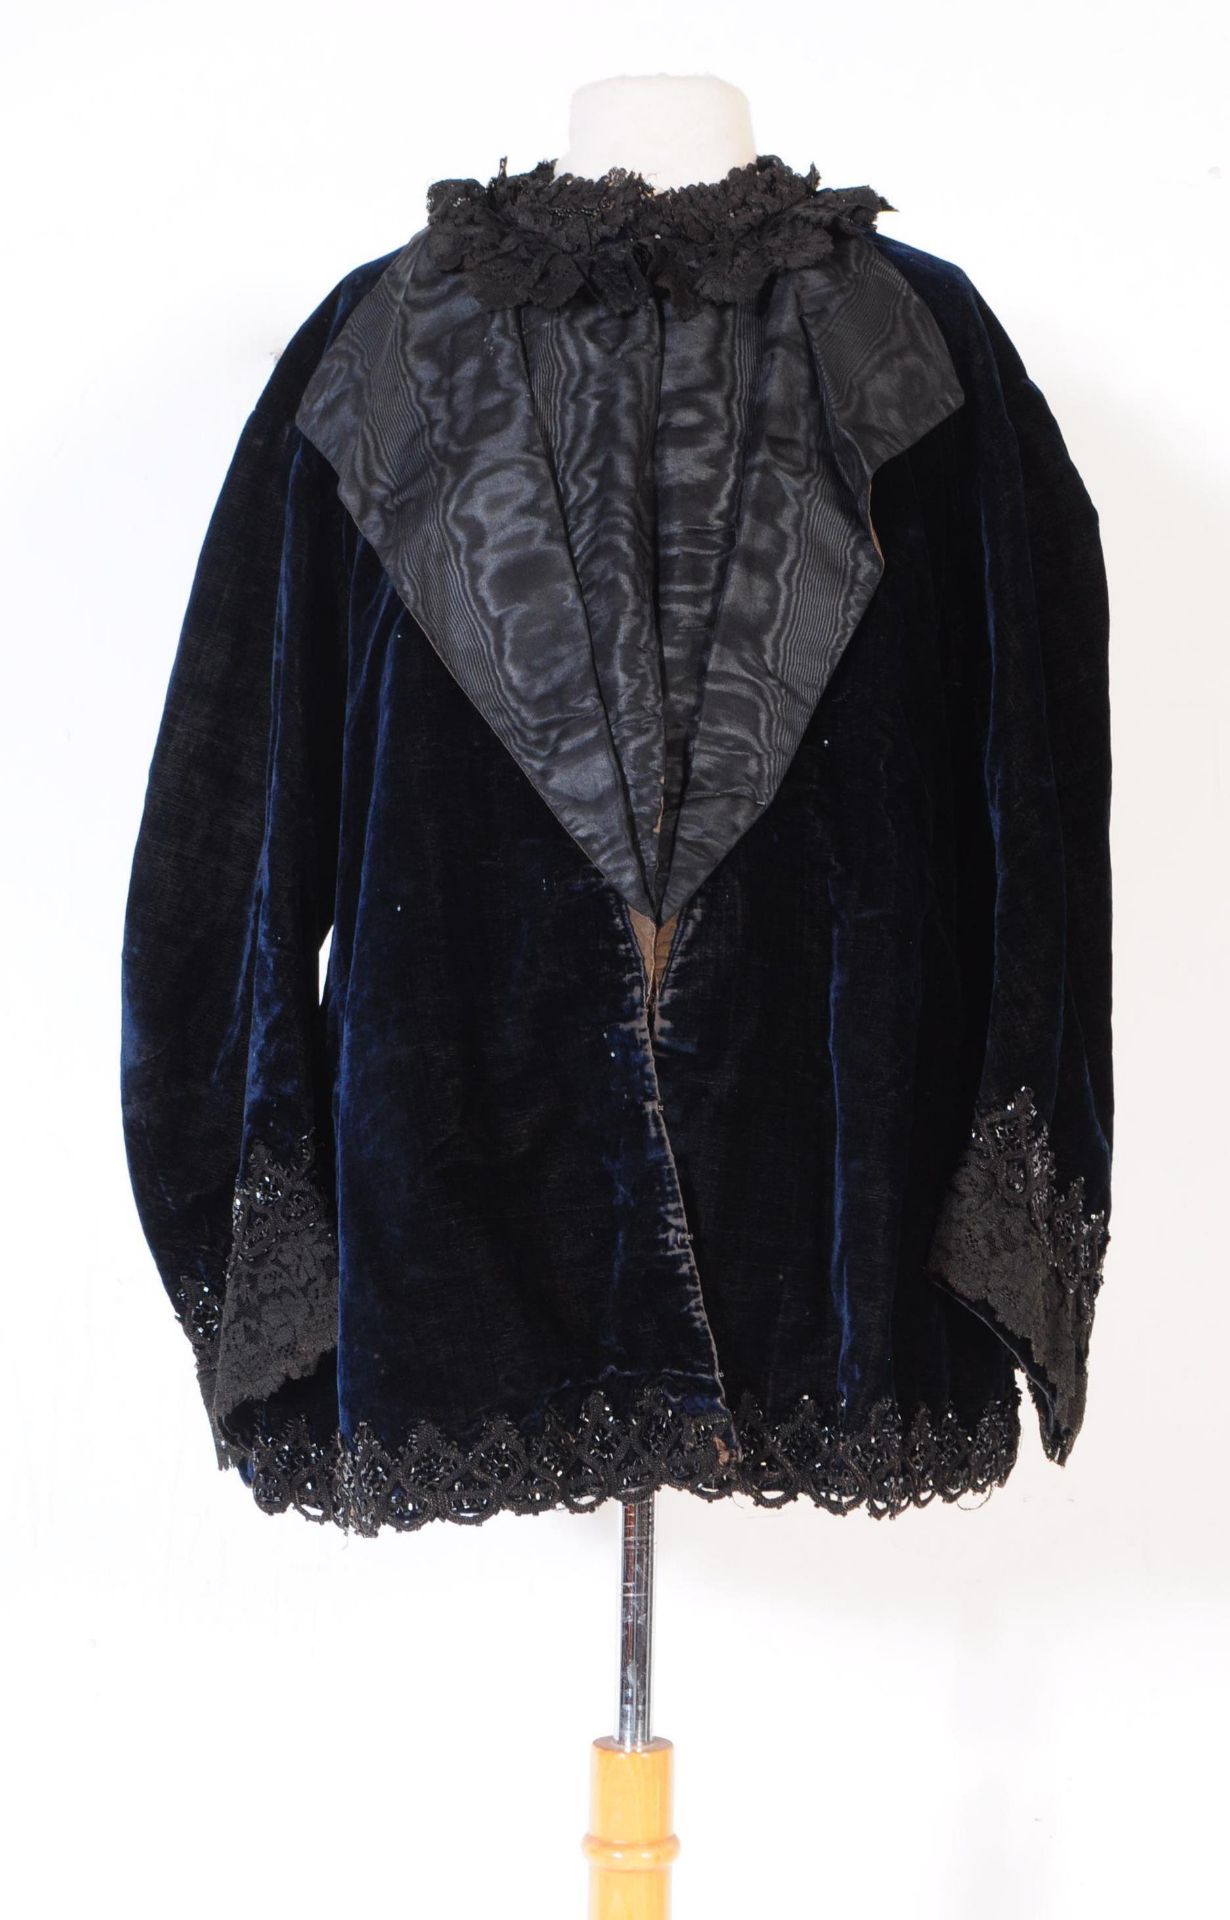 TWO VICTORIAN CLOTHING ITEMS - VELVET CAPE & SHIRT - Image 2 of 12